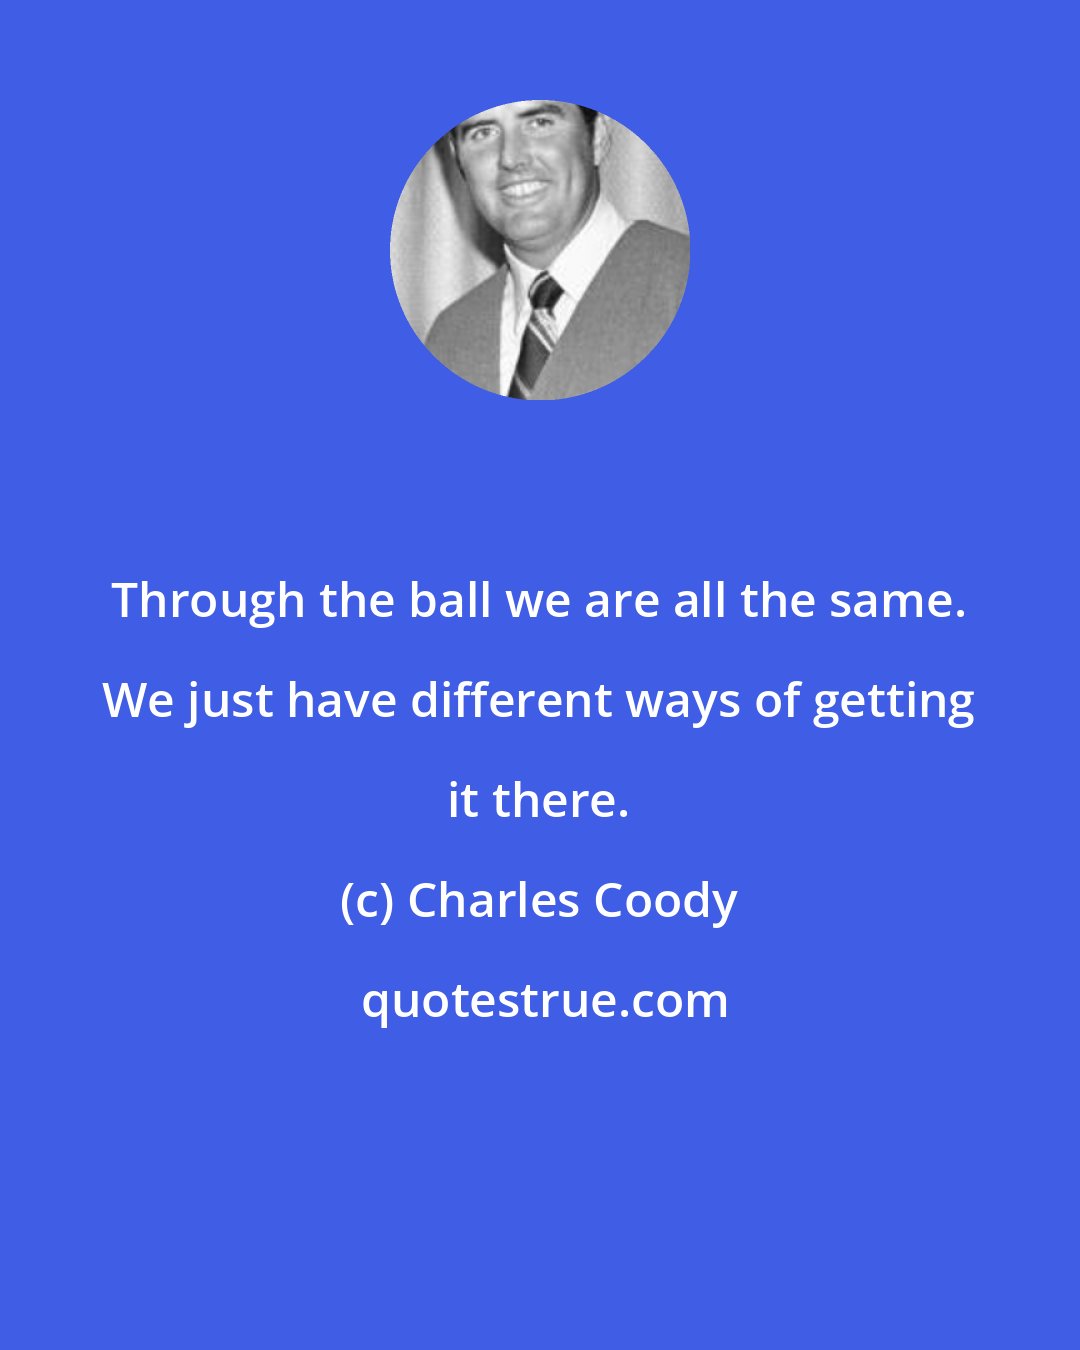 Charles Coody: Through the ball we are all the same. We just have different ways of getting it there.